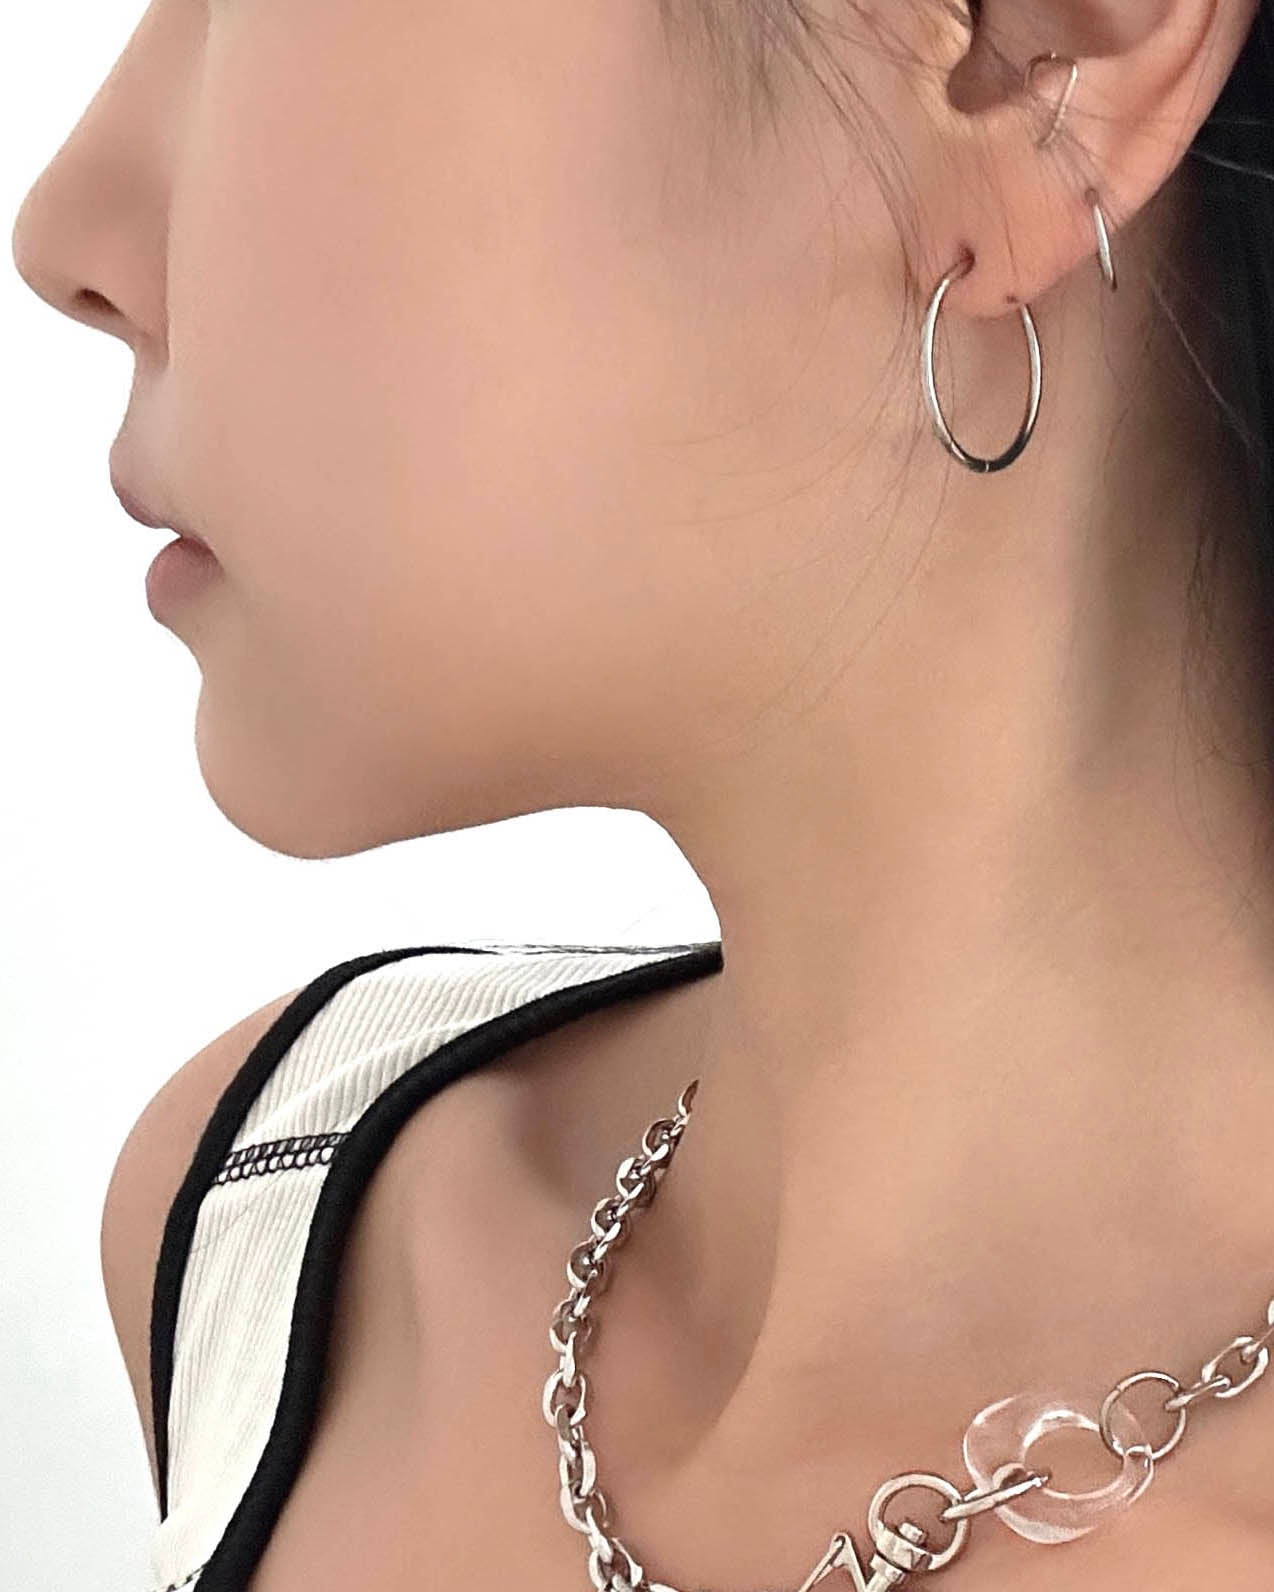 surgical thin earring